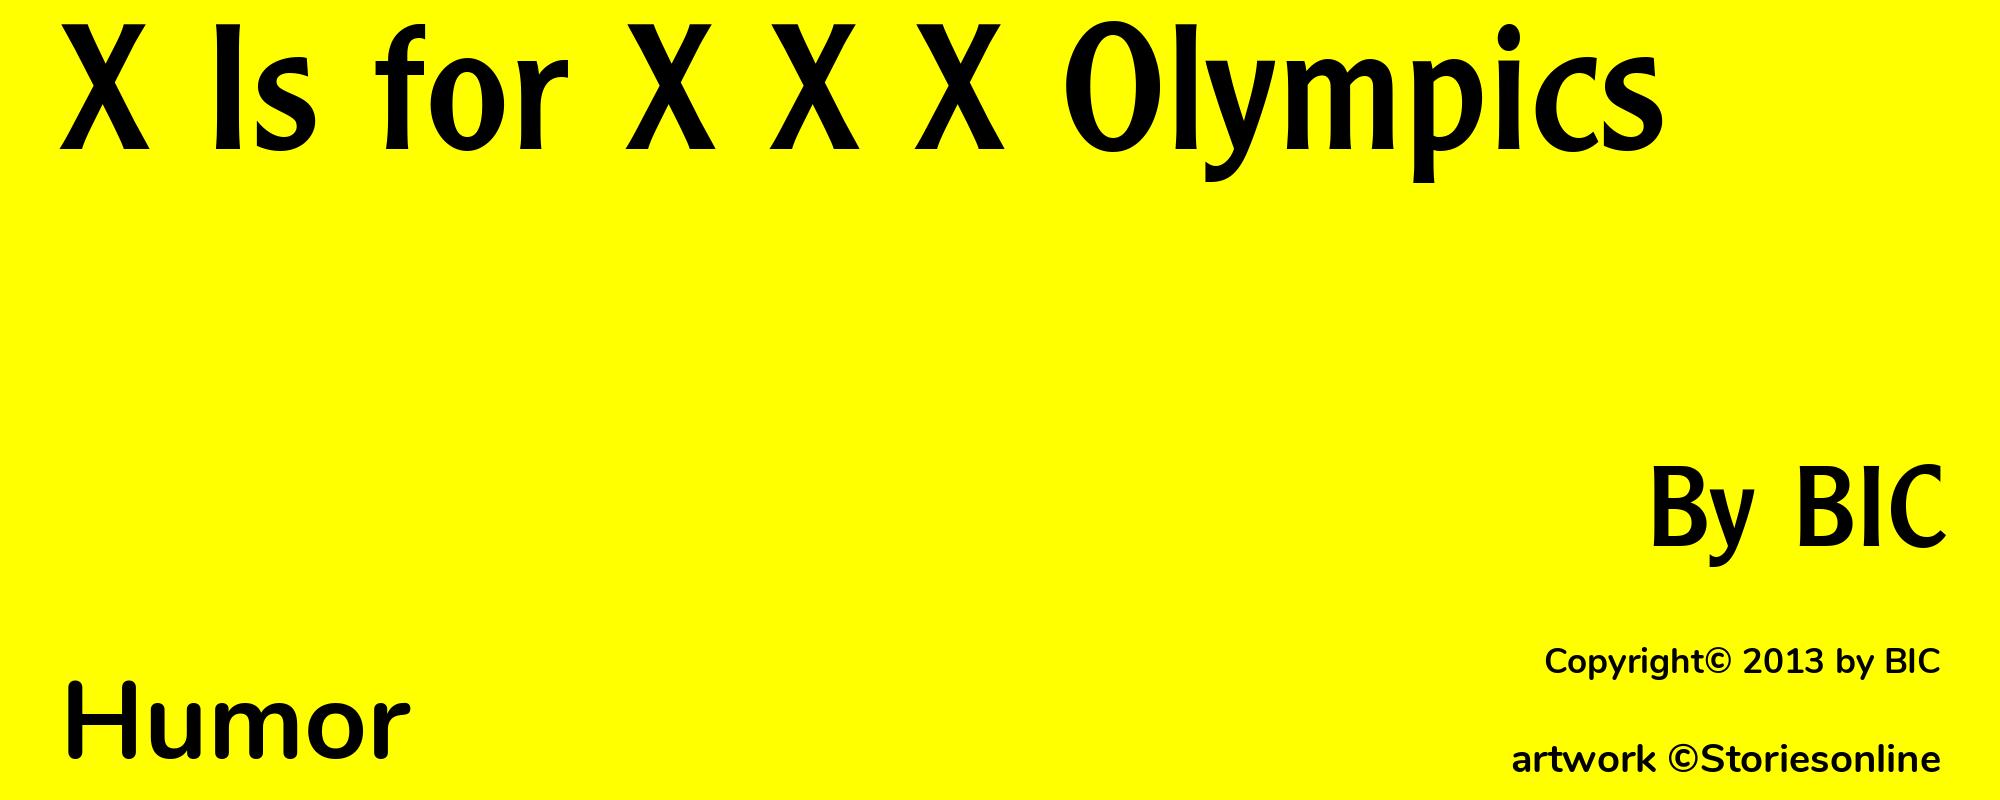 X Is for X X X Olympics - Cover